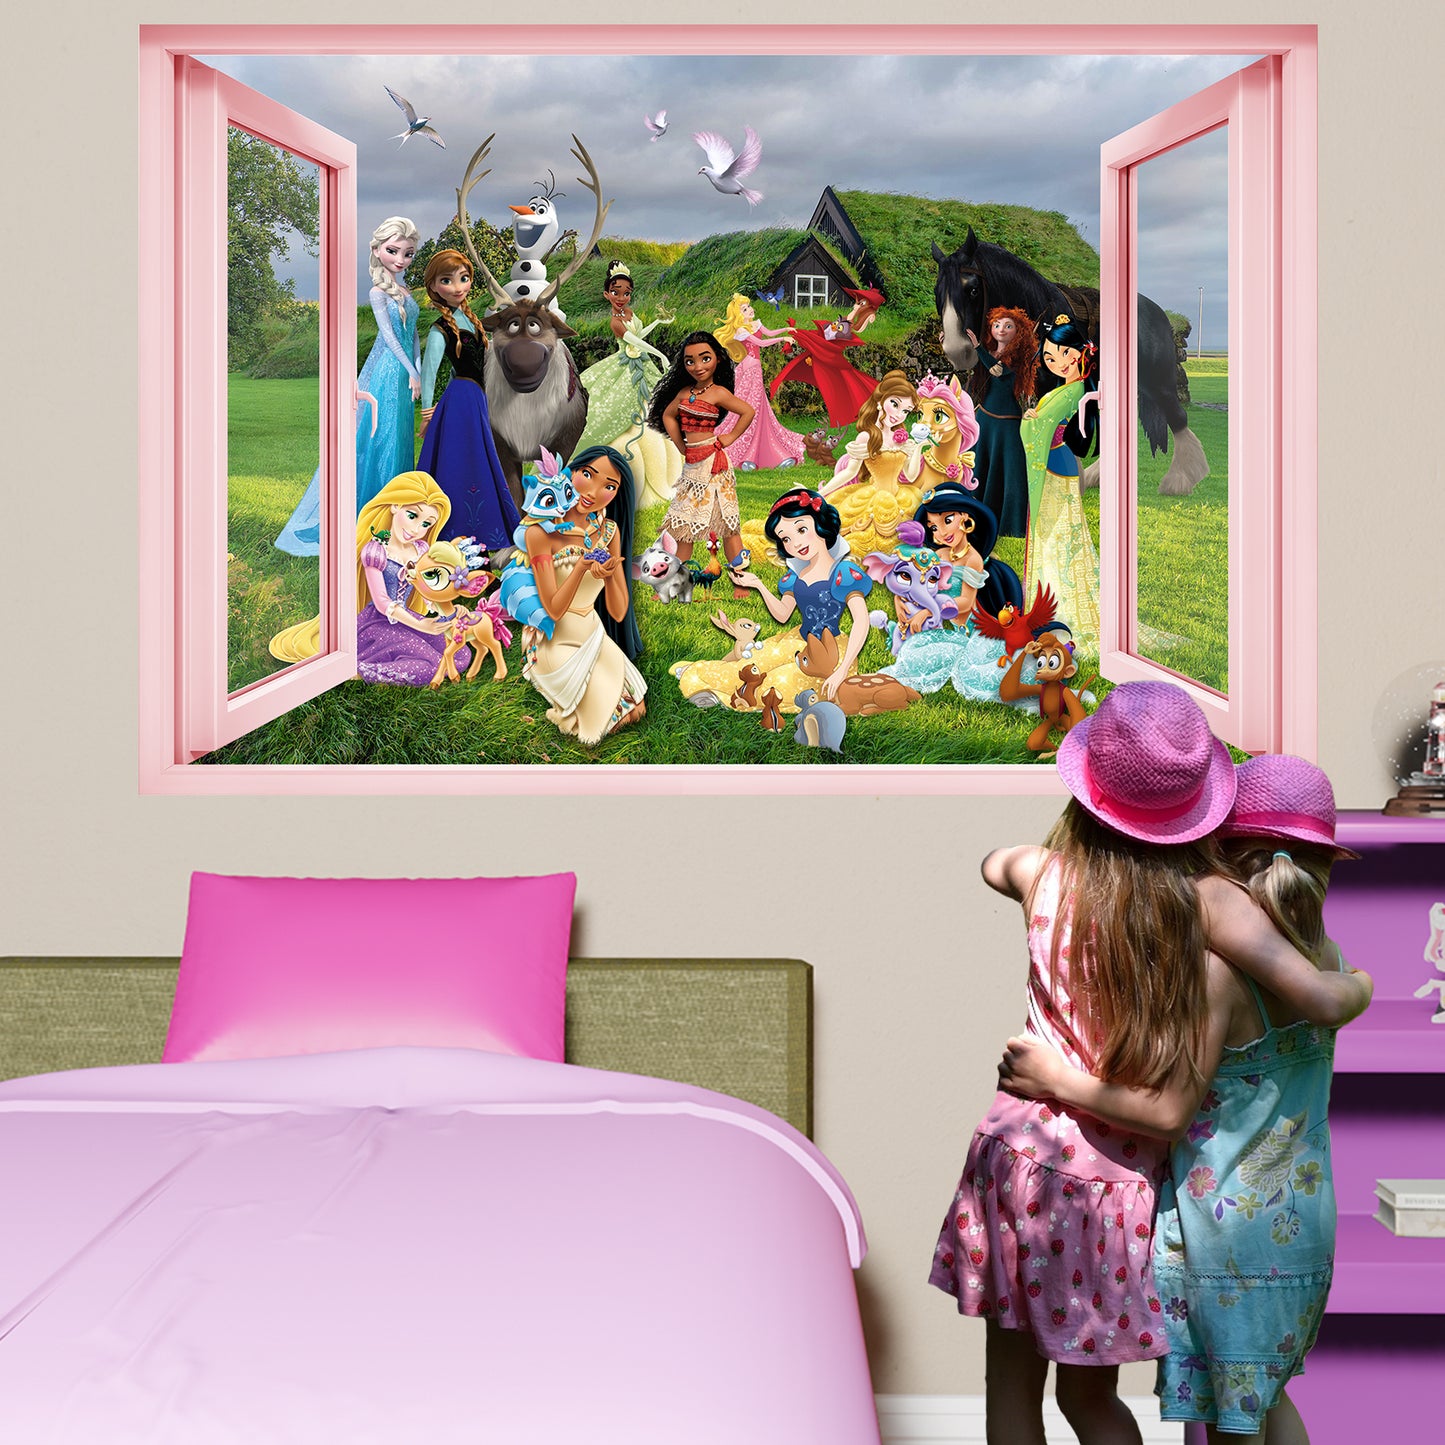 Princess Characters and Pets Wall Sticker Art Poster Decal Mural  Nursery Girls Room Decor 1084